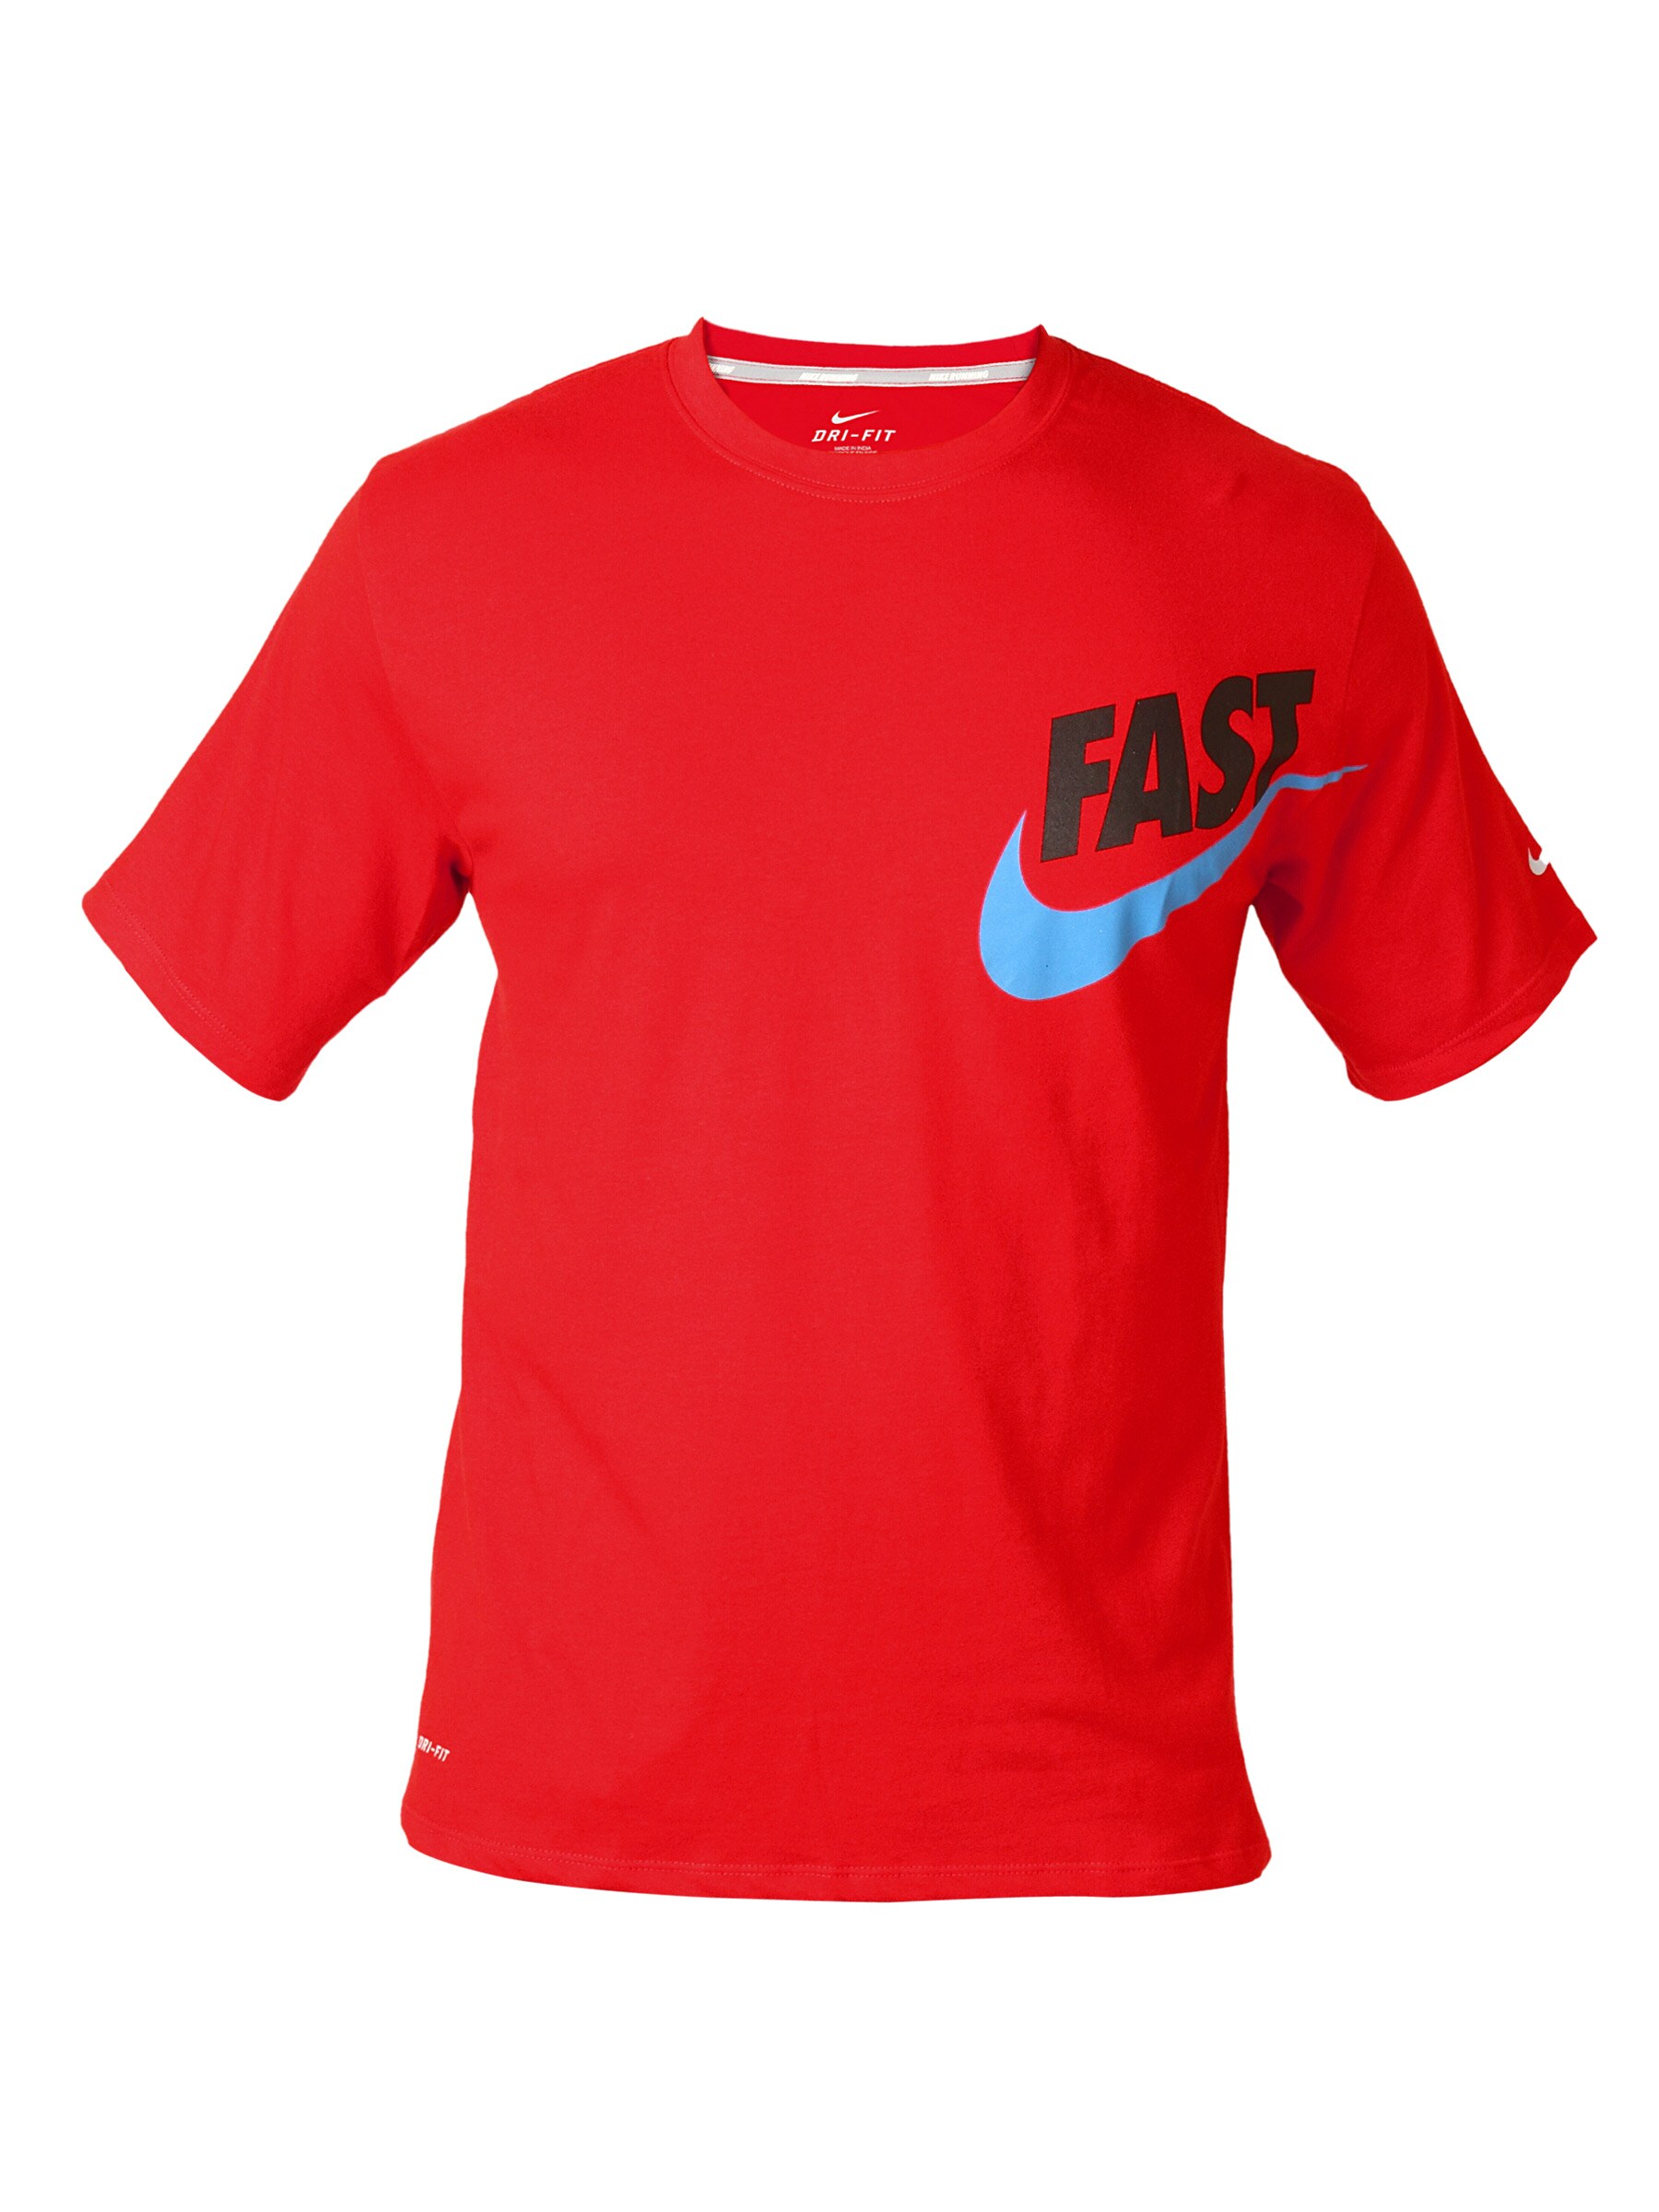 Nike Men Asss Crusier Graphic Red T-Shirts